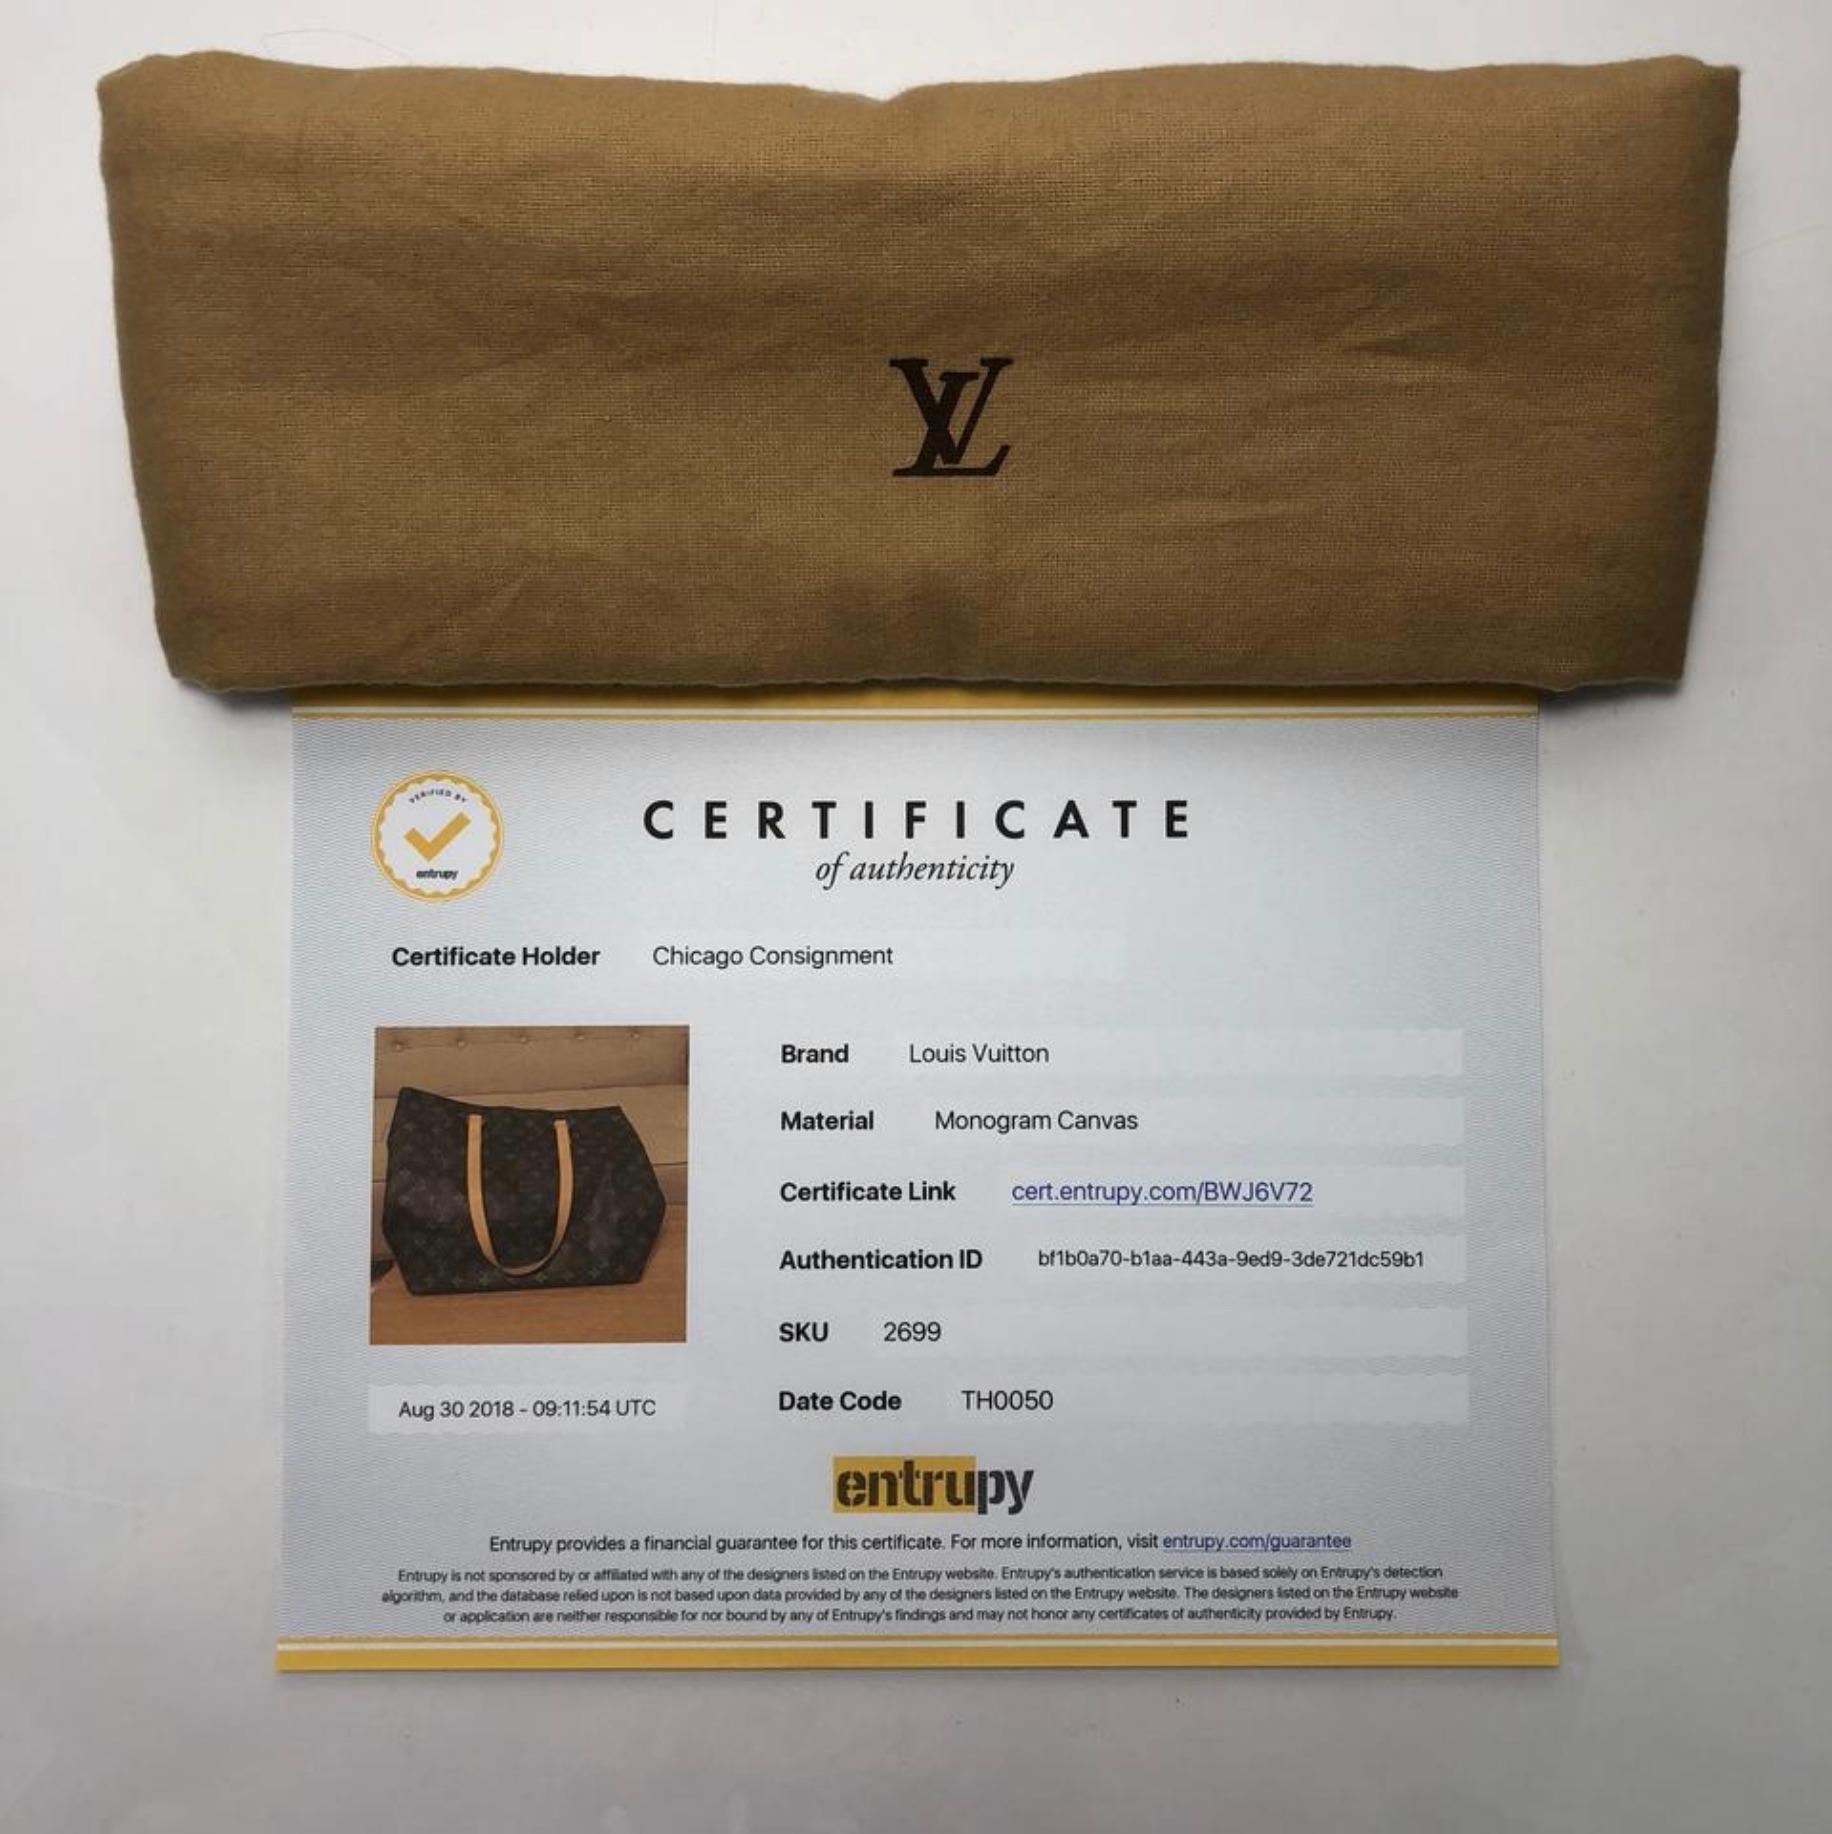 MODEL - Louis Vuitton Monogram Cabas Mezzo

CONDITION - Exceptional! Light vachette, light watermarks, no handle darkening, no dryness. Bright and shiny hardware with no tarnishing. No rips, holes, tears, stains or odors. Piece maintains original